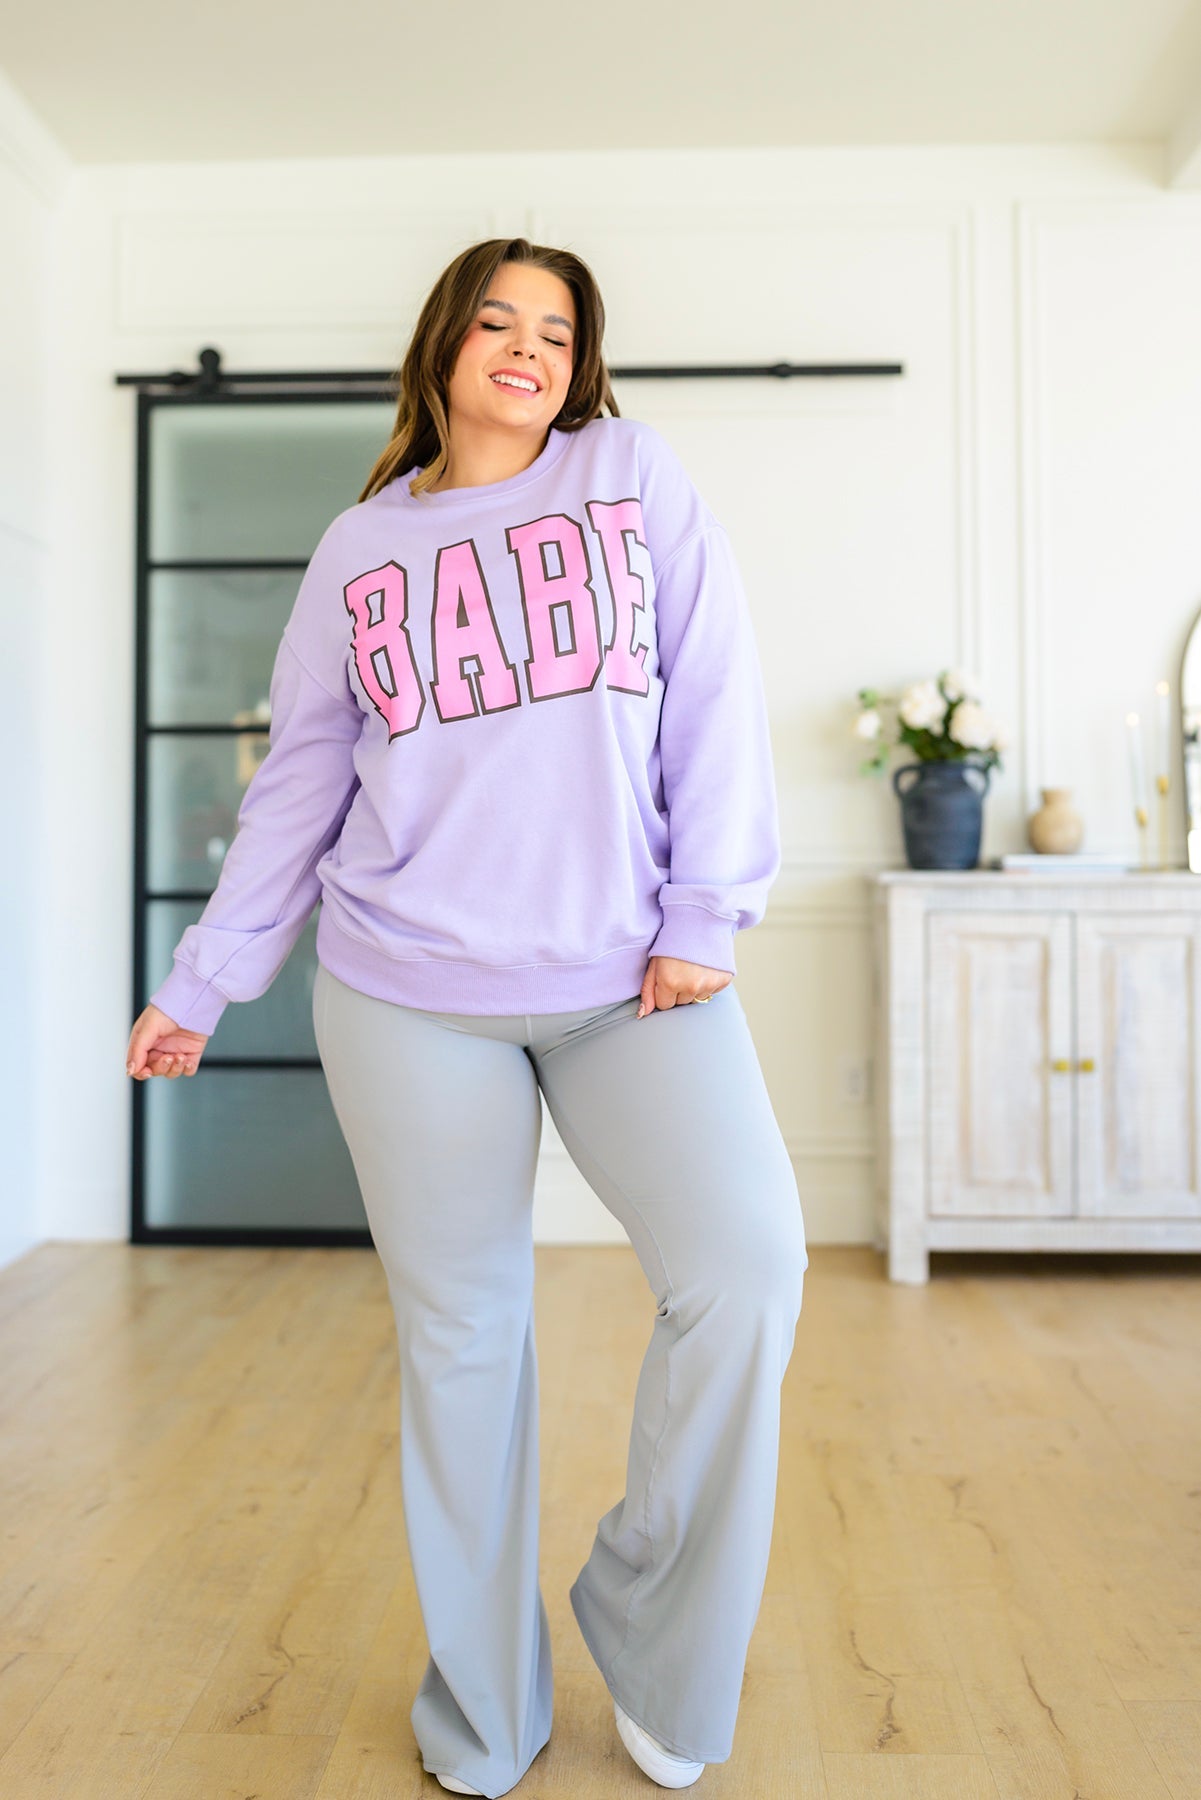 She's a Babe Sweatshirt Womens Southern Soul Collectives 